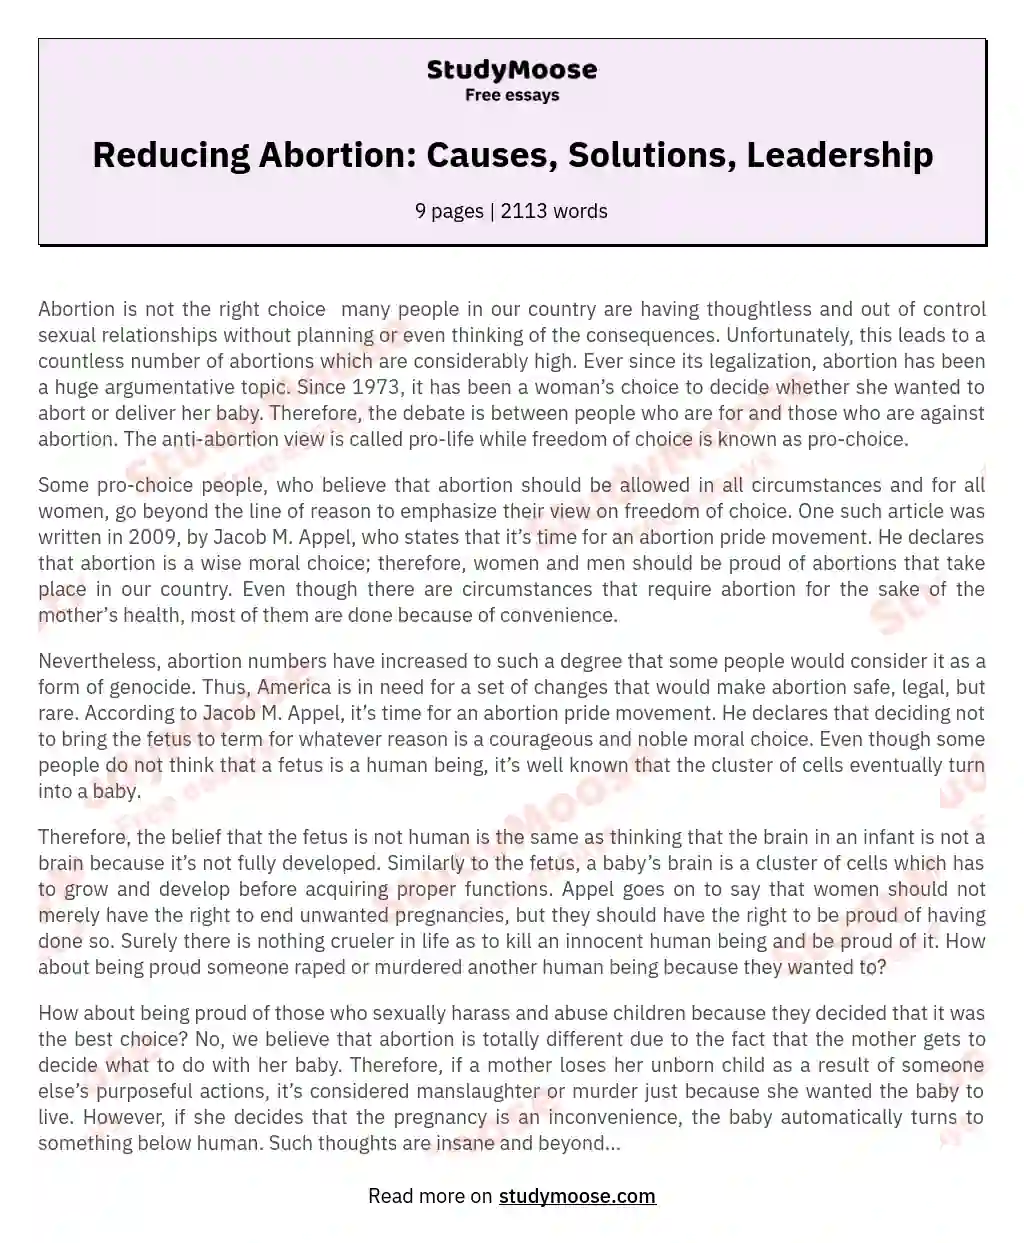 Reducing Abortion: Causes, Solutions, Leadership essay